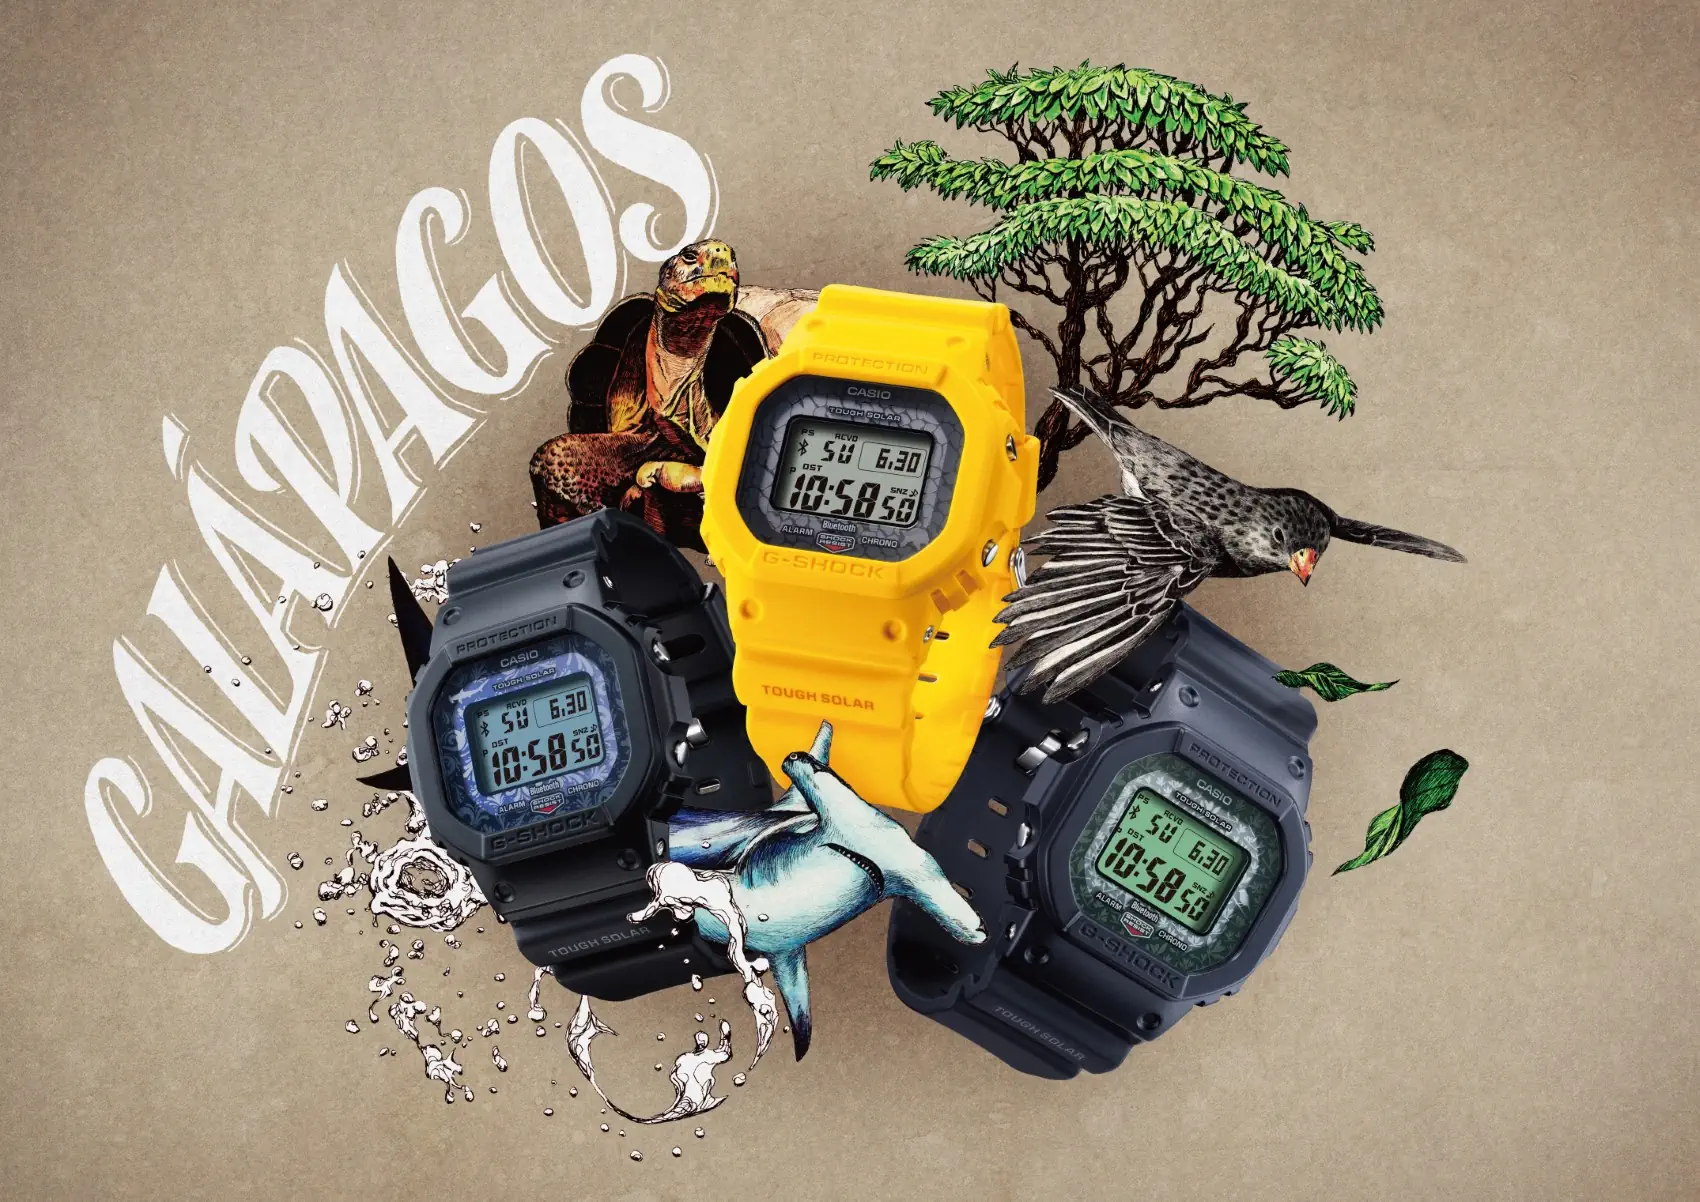 G-SHOCK Goes Wild: A Galapagos Odyssey on Your Wrist